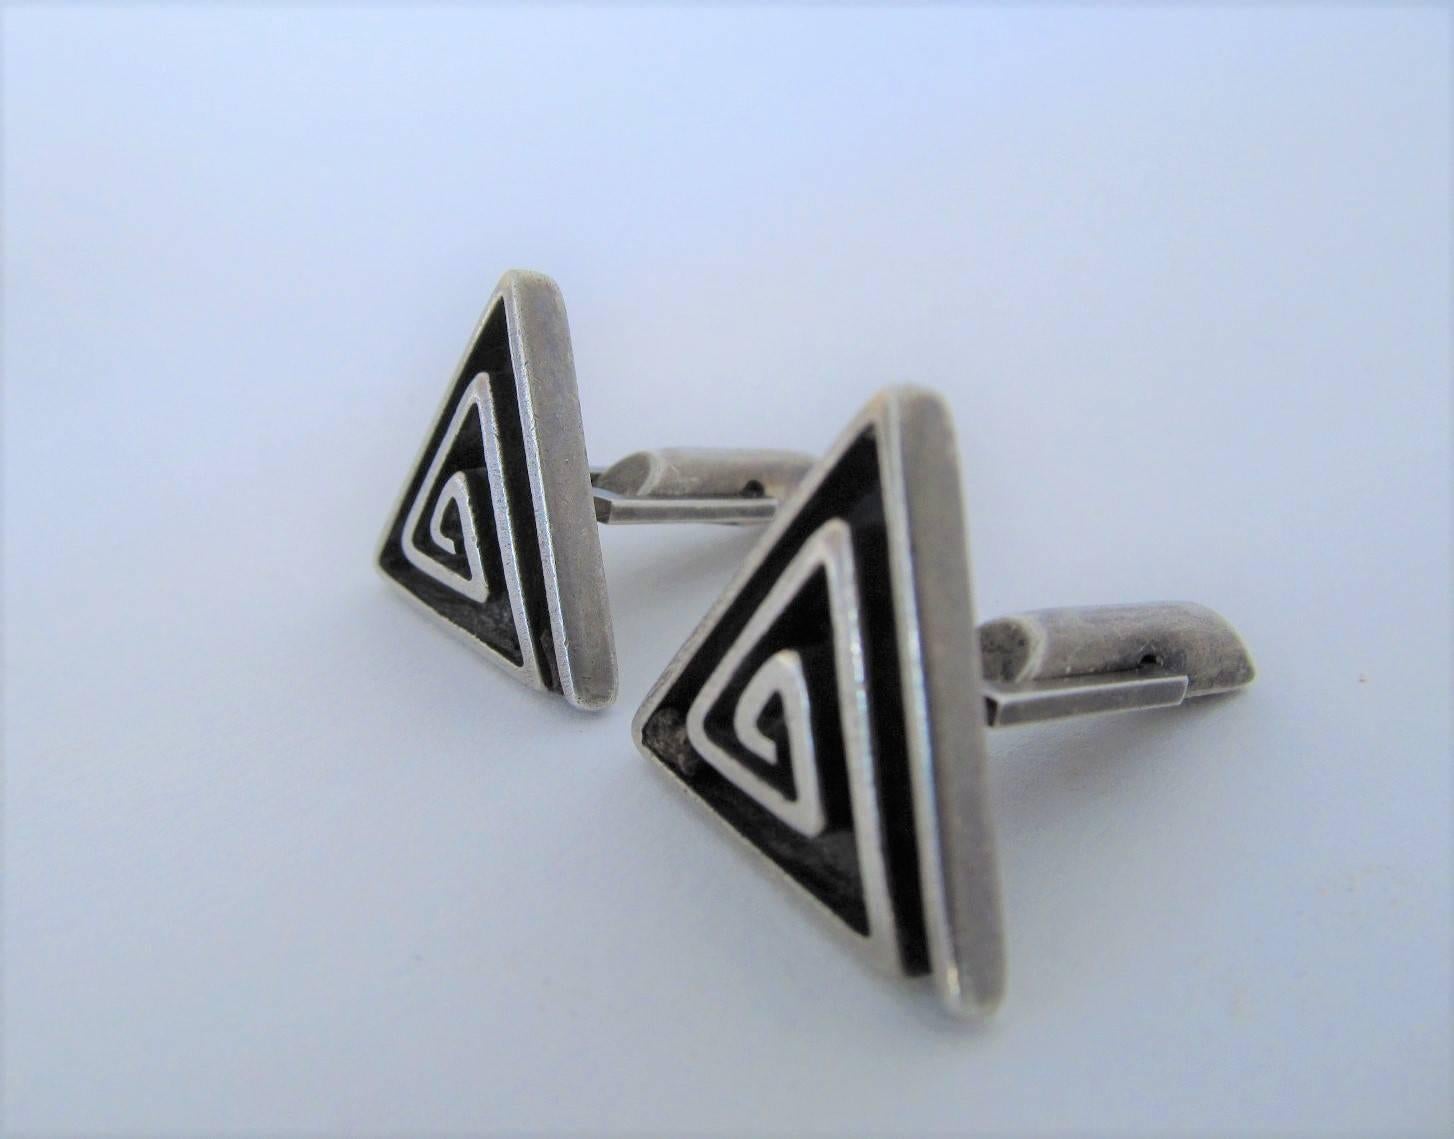 Understated but distinctive design by one of the most important Navajo jewelry makers. A variation on one of his recurring design patterns, the spiral of life. 

Kenneth Begay is considered the father of modern Navajo jewelry. Like so many